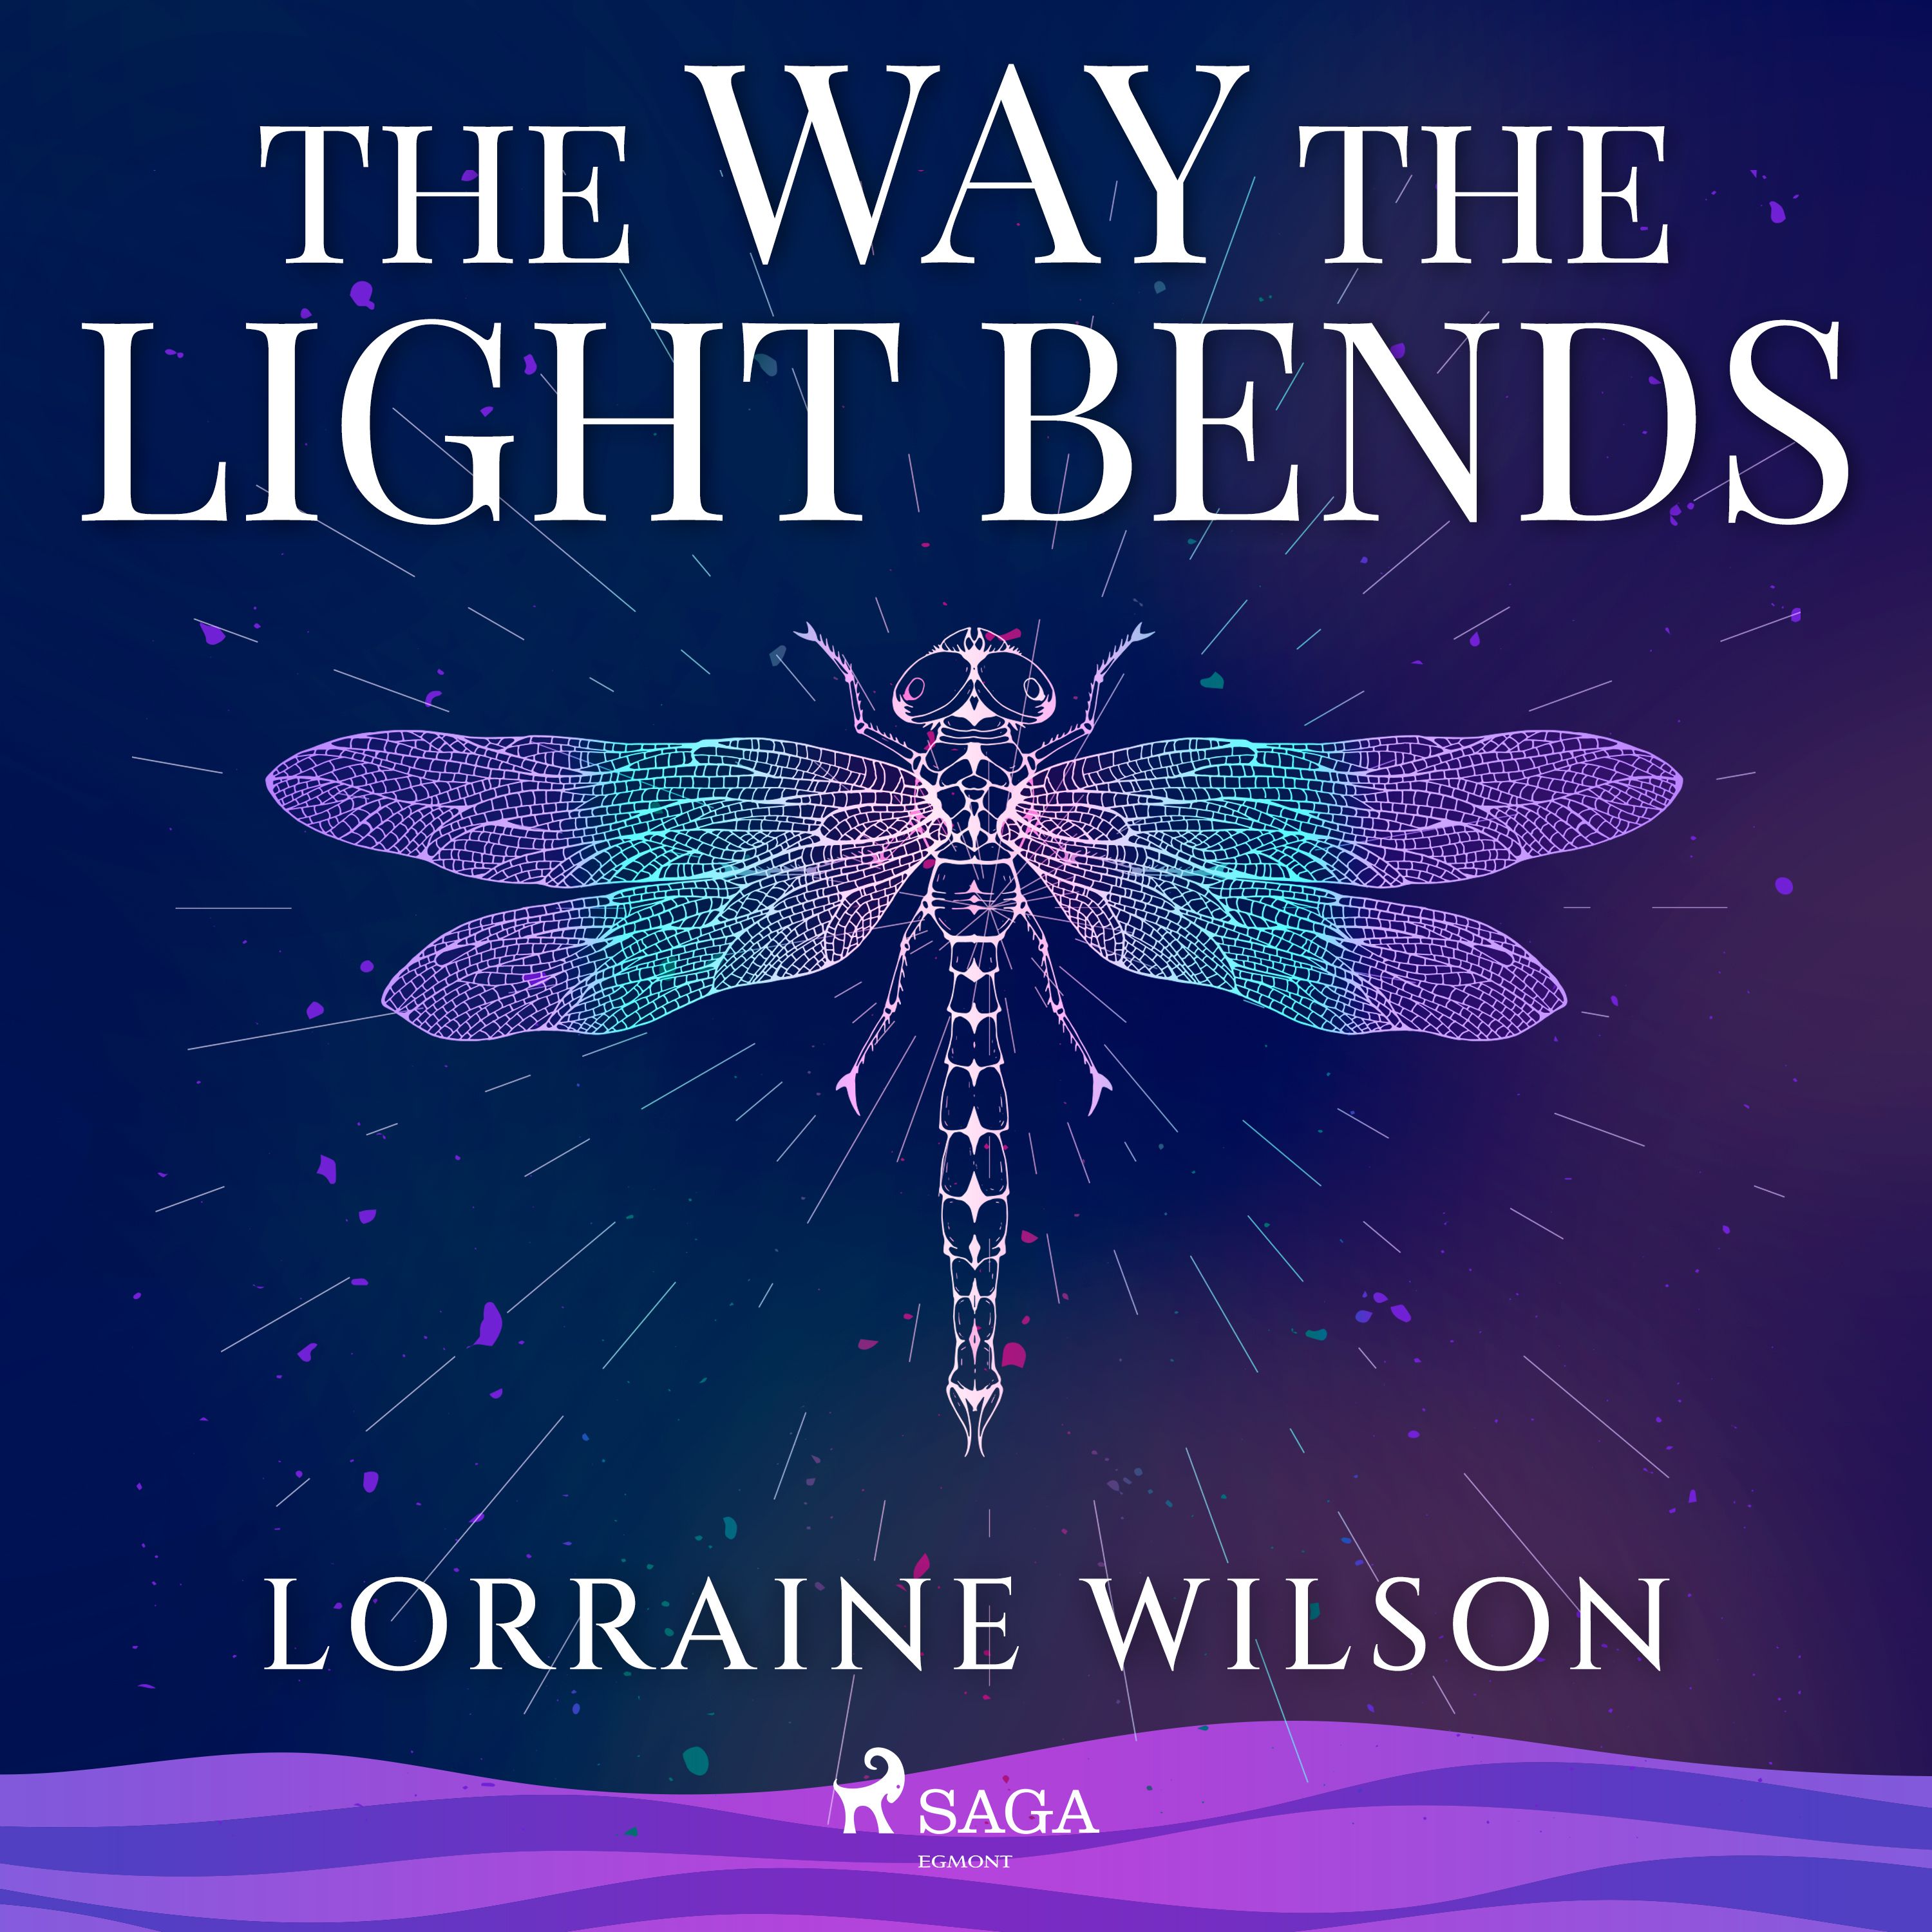 The Way the Light Bends, audiobook by Lorraine Wilson